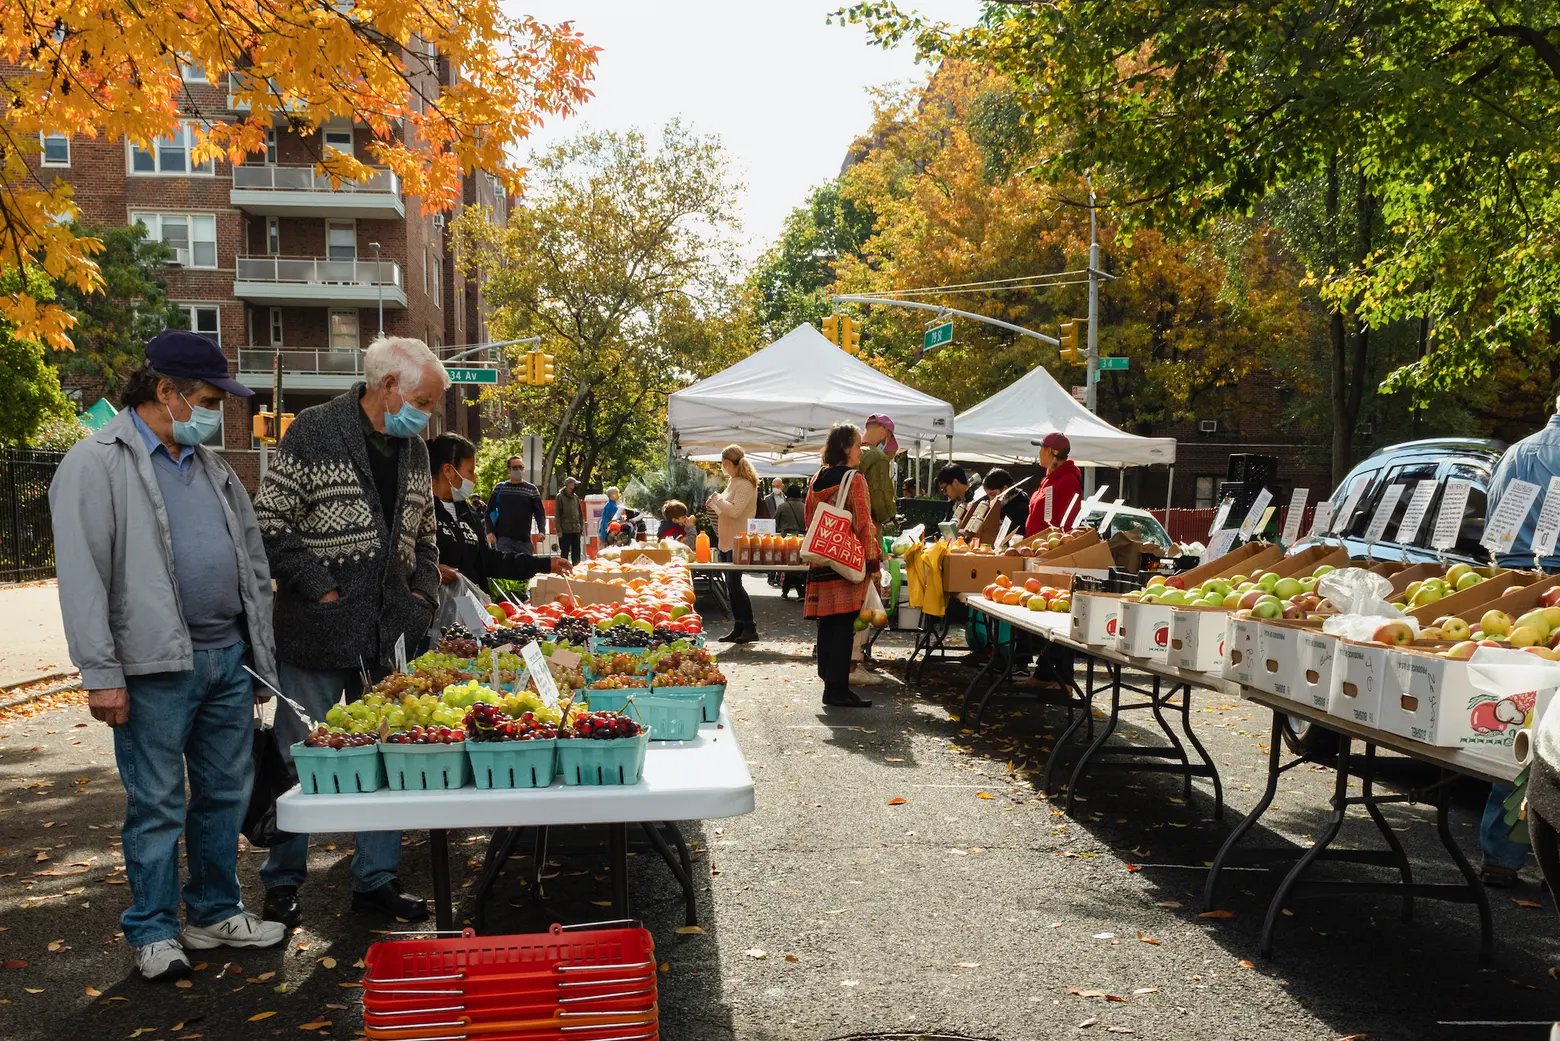 Fresh produce and family farms: Find New York City’s best farmers markets